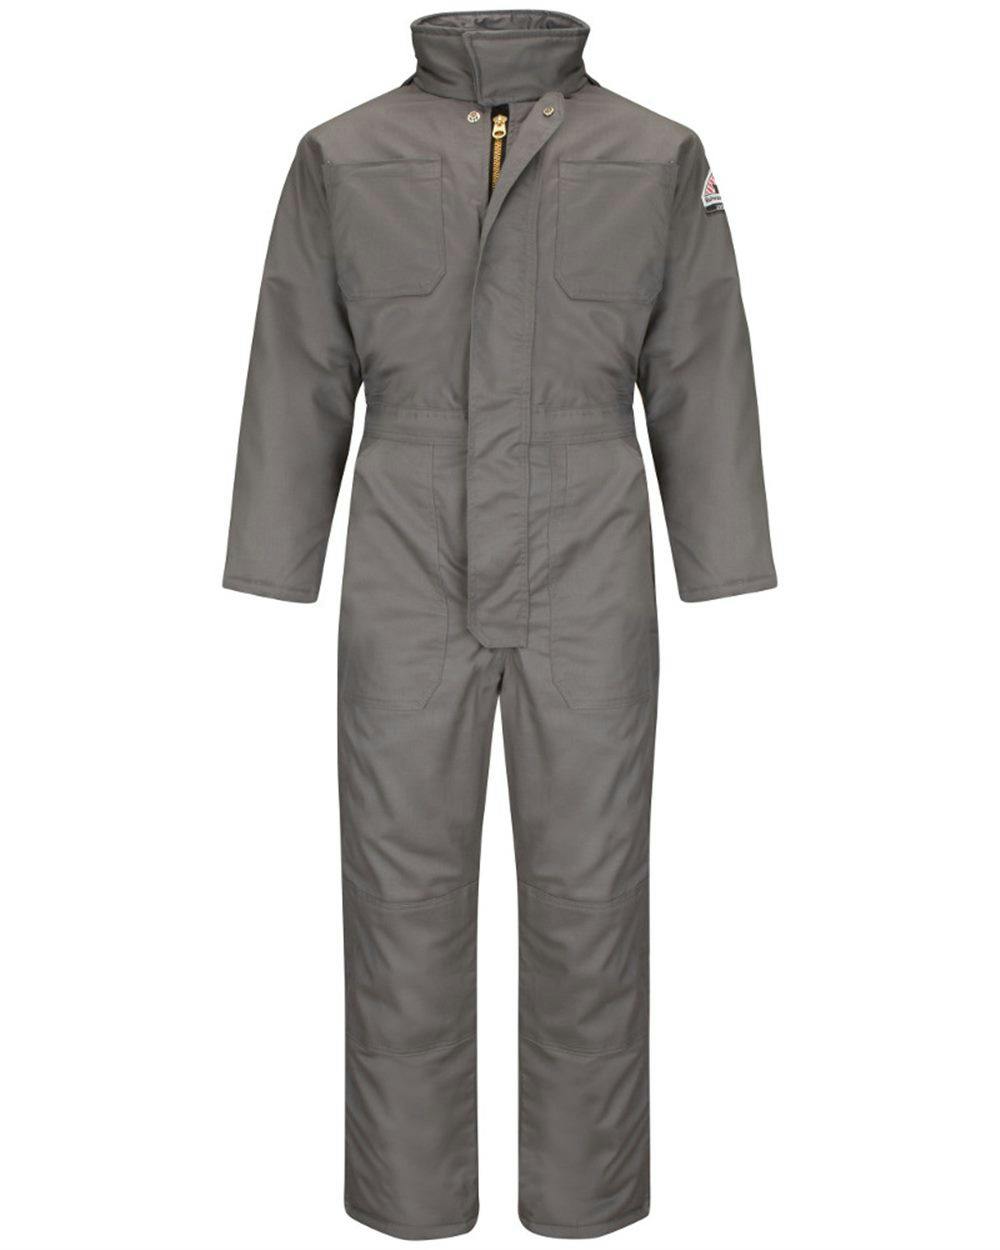 Image for Premium Insulated Coverall - EXCEL FR® ComforTouch - Tall Sizes - CLC8T